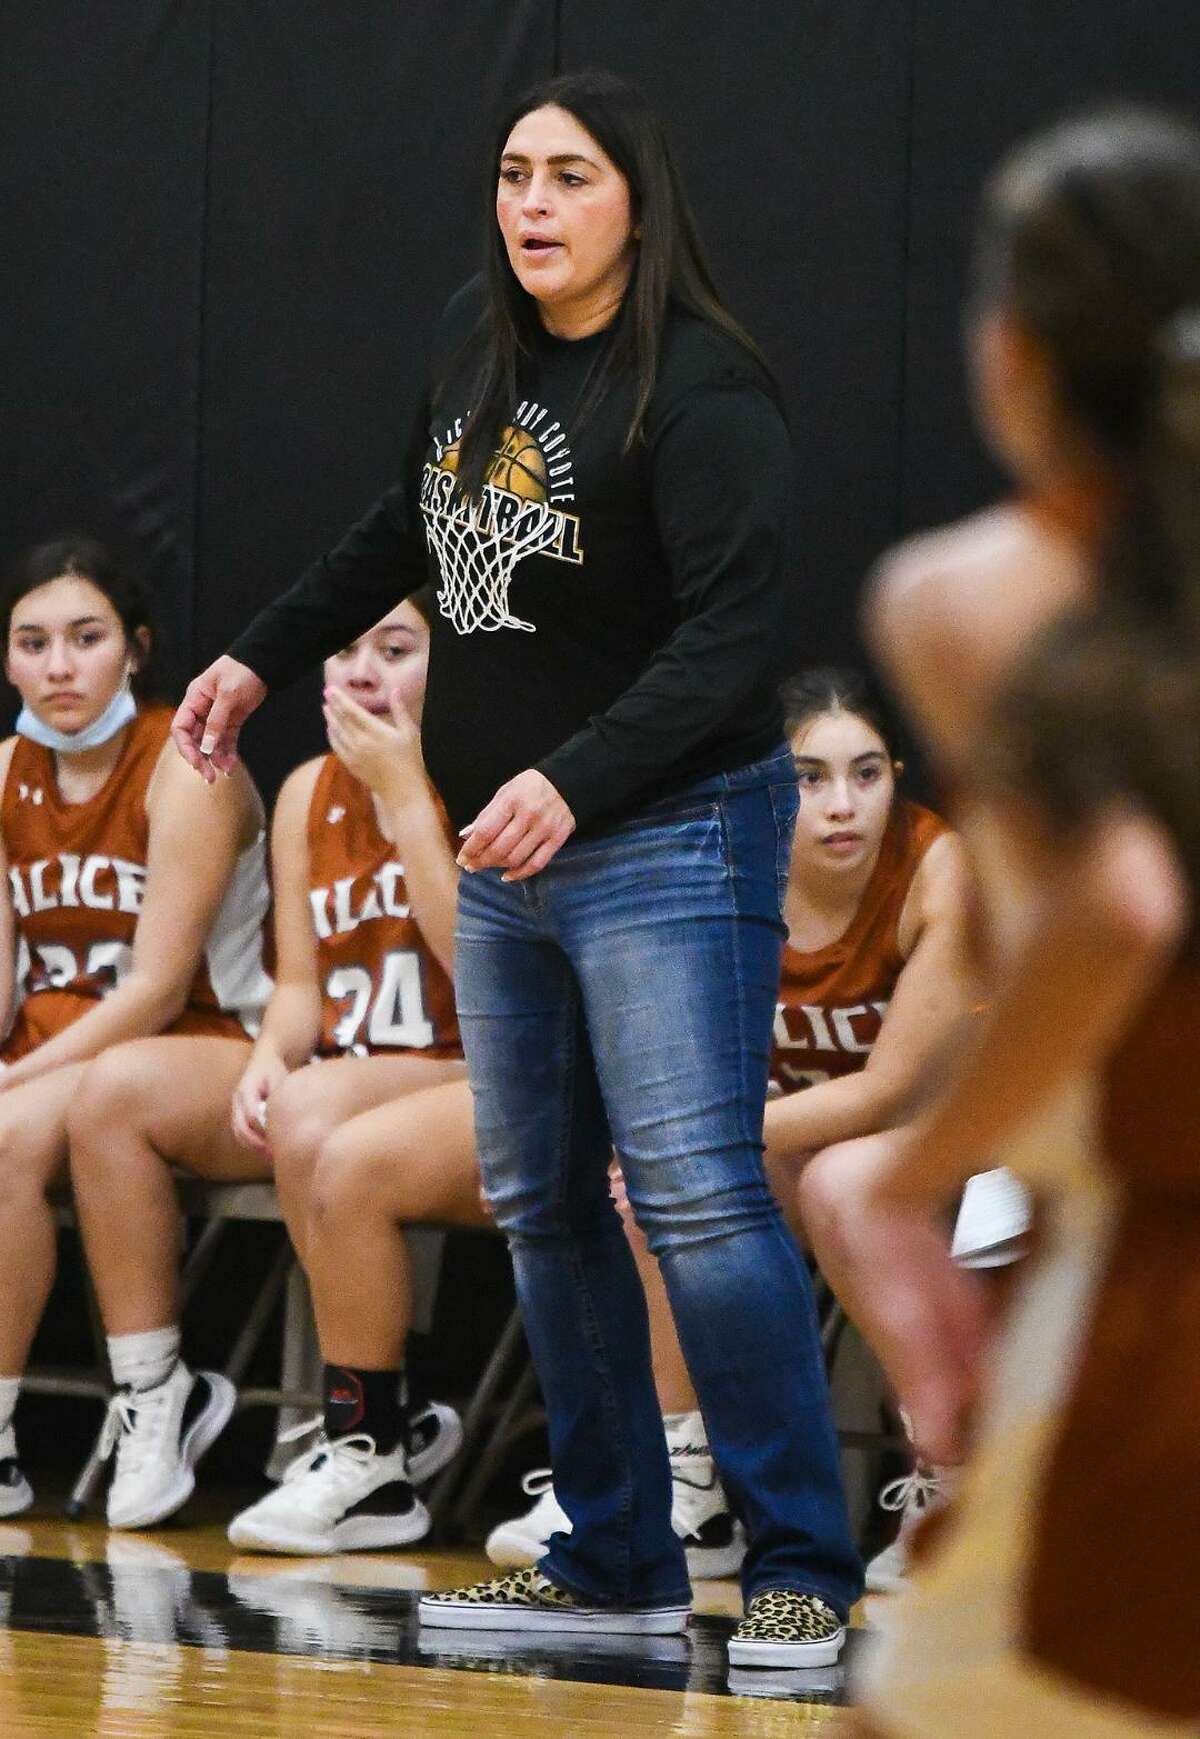 Mari Santos was named the head coach at her Alma Mater Alice High School prior to the start of last season.